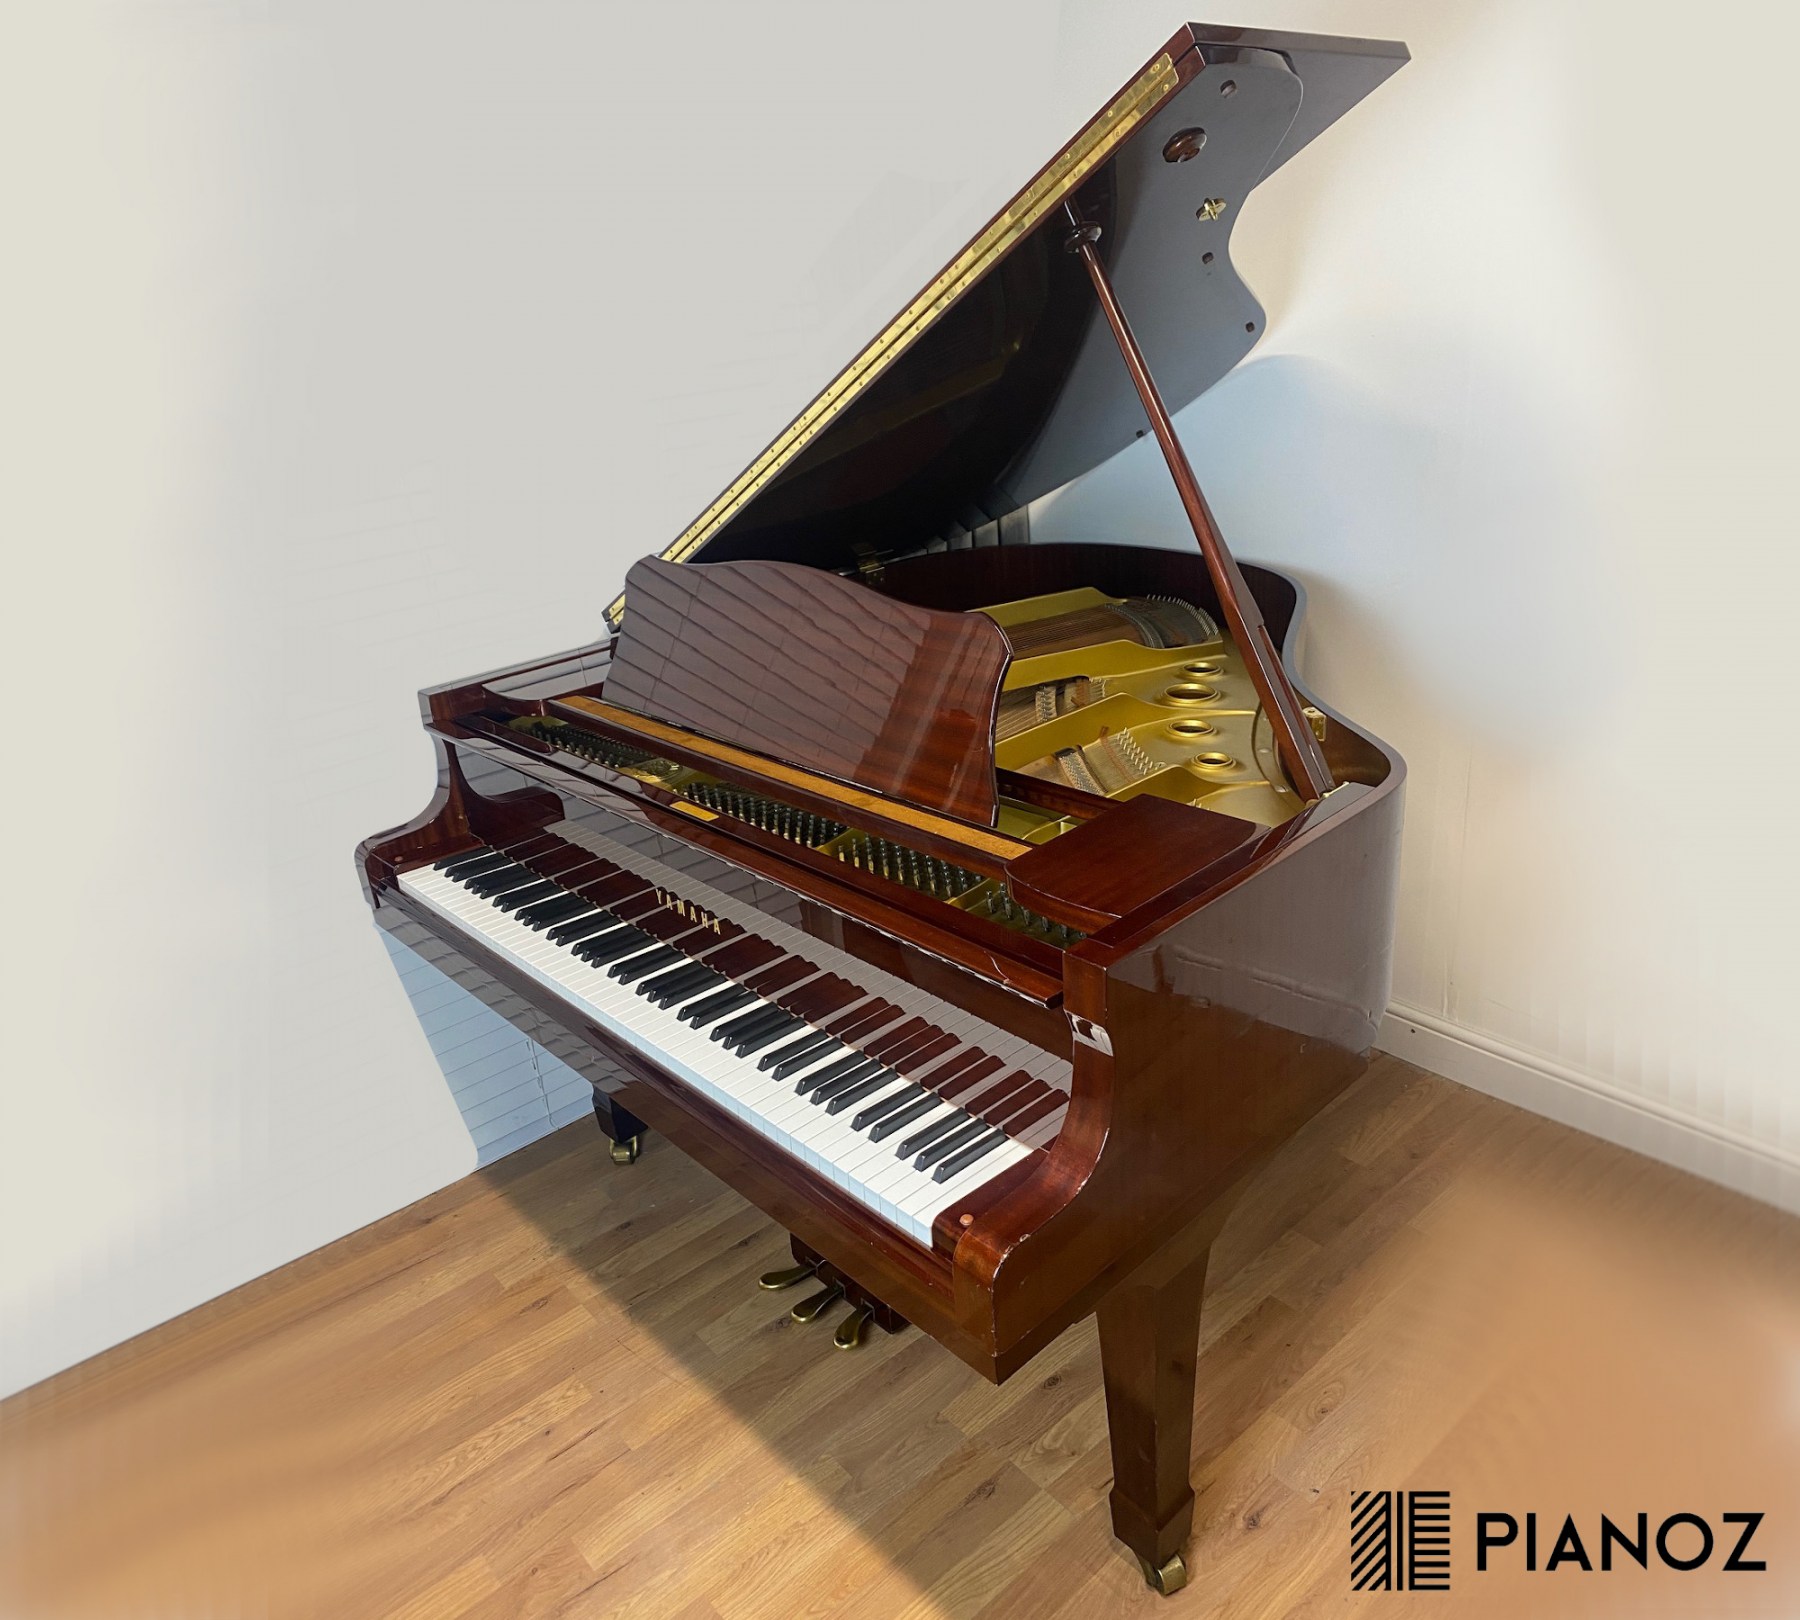 Yamaha G1 Baby Grand Piano piano for sale in UK